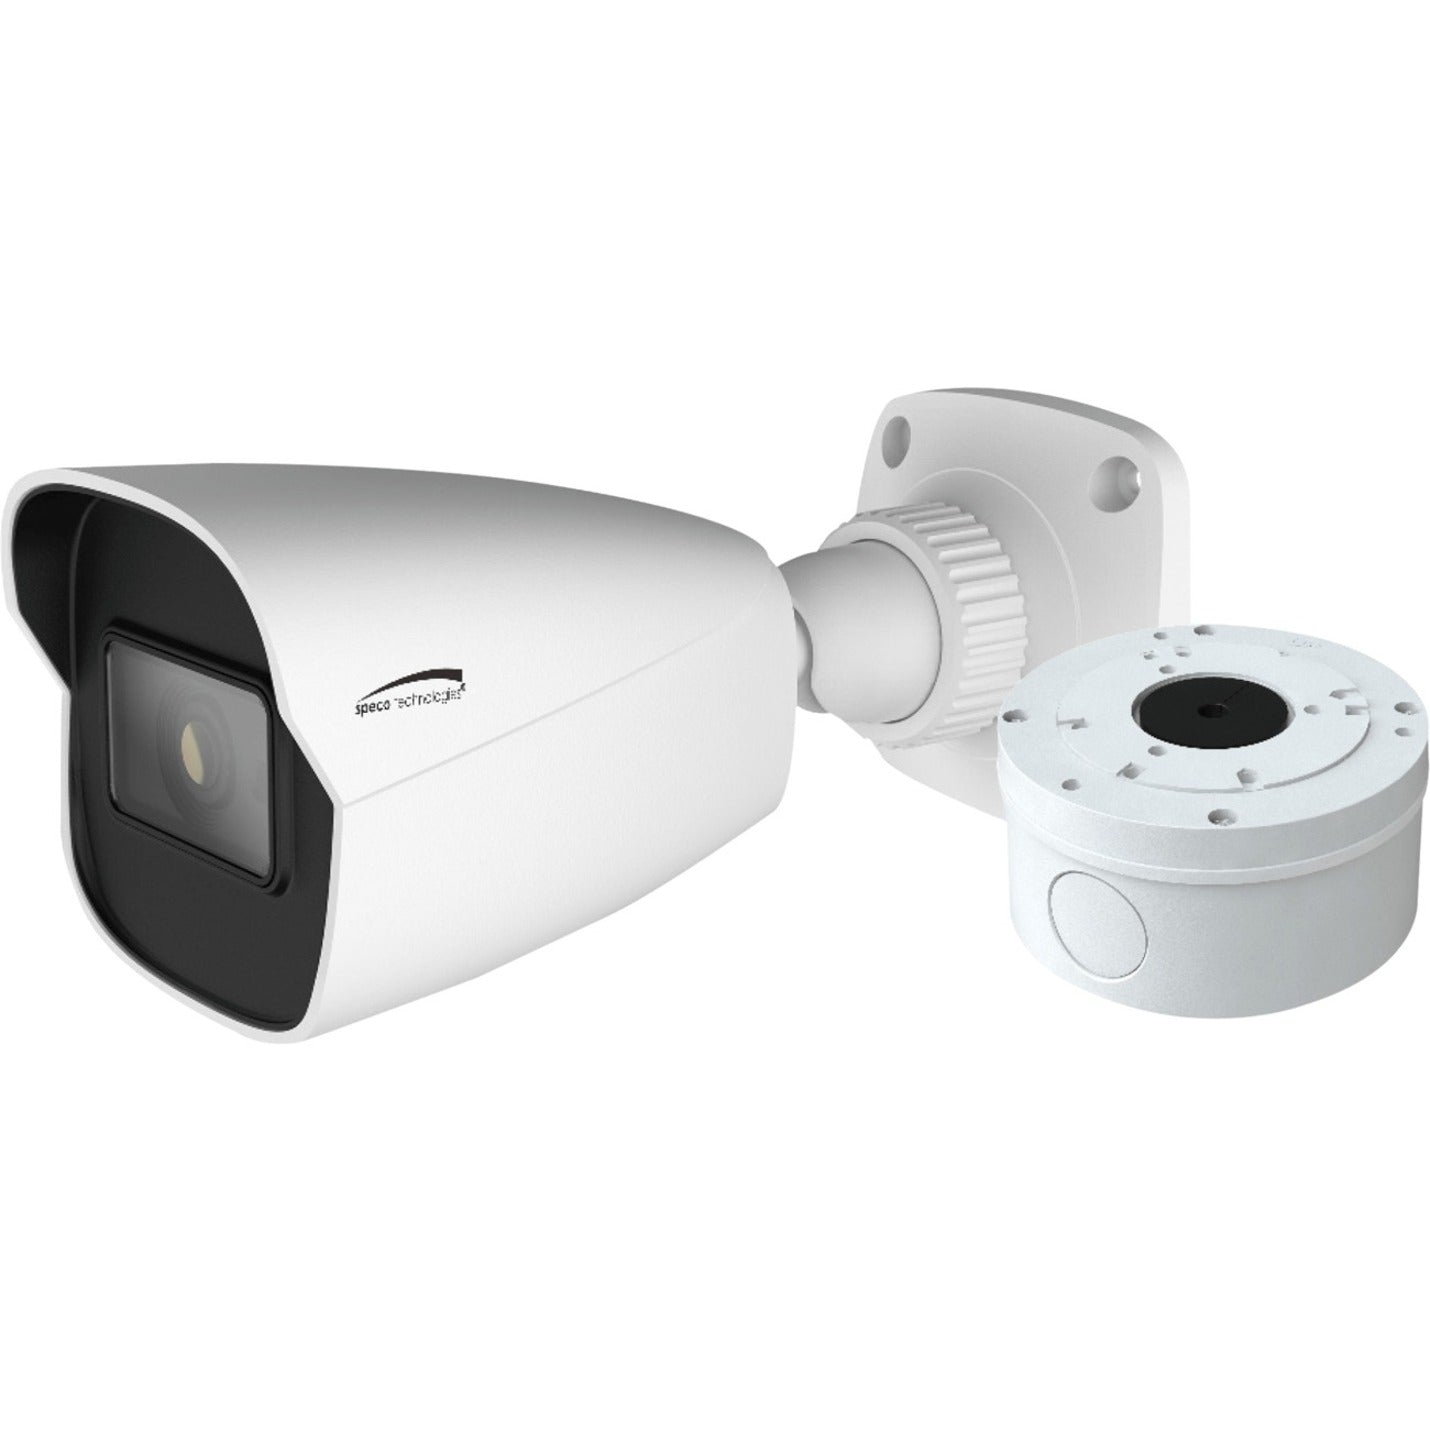 Speco VLB5 2MP HD-TVI IR Bullet Camera with Junction Box, Weather Resistant, 65.60 ft Night Vision